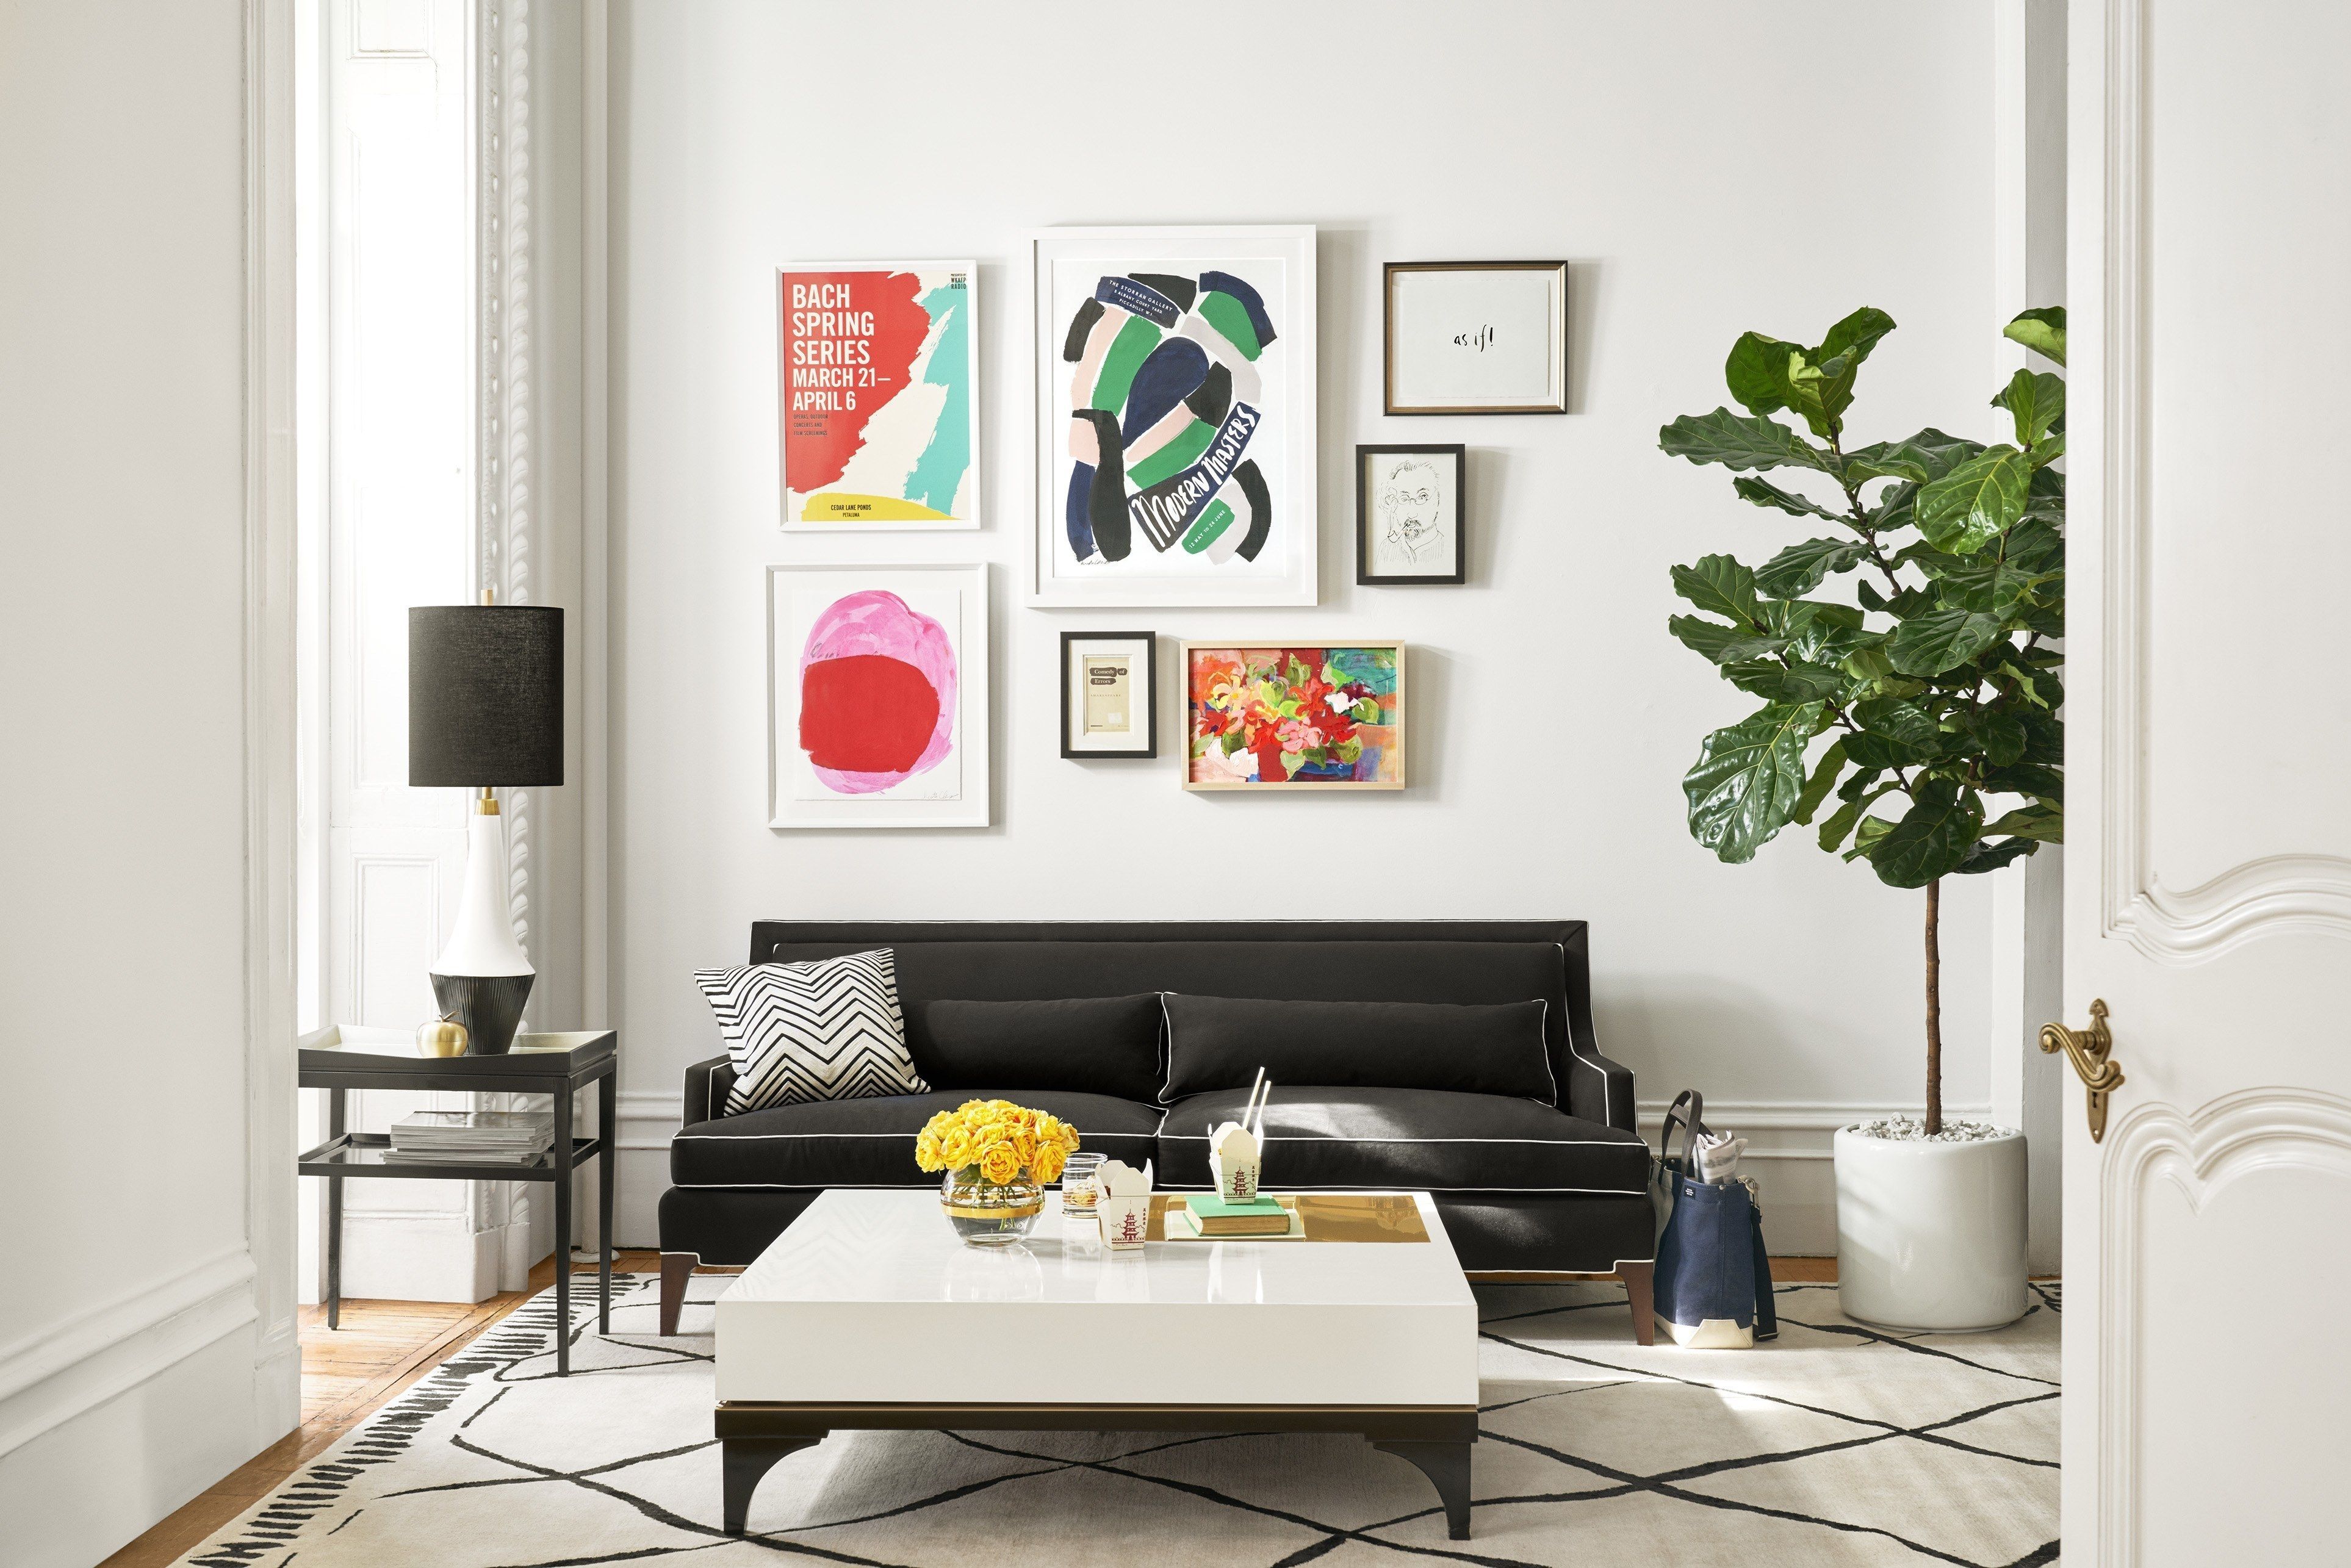 How To Choose The Right Art For A Gallery Wall | Gallery Wall, Walls Throughout Kate Spade Wall Art (View 6 of 20)